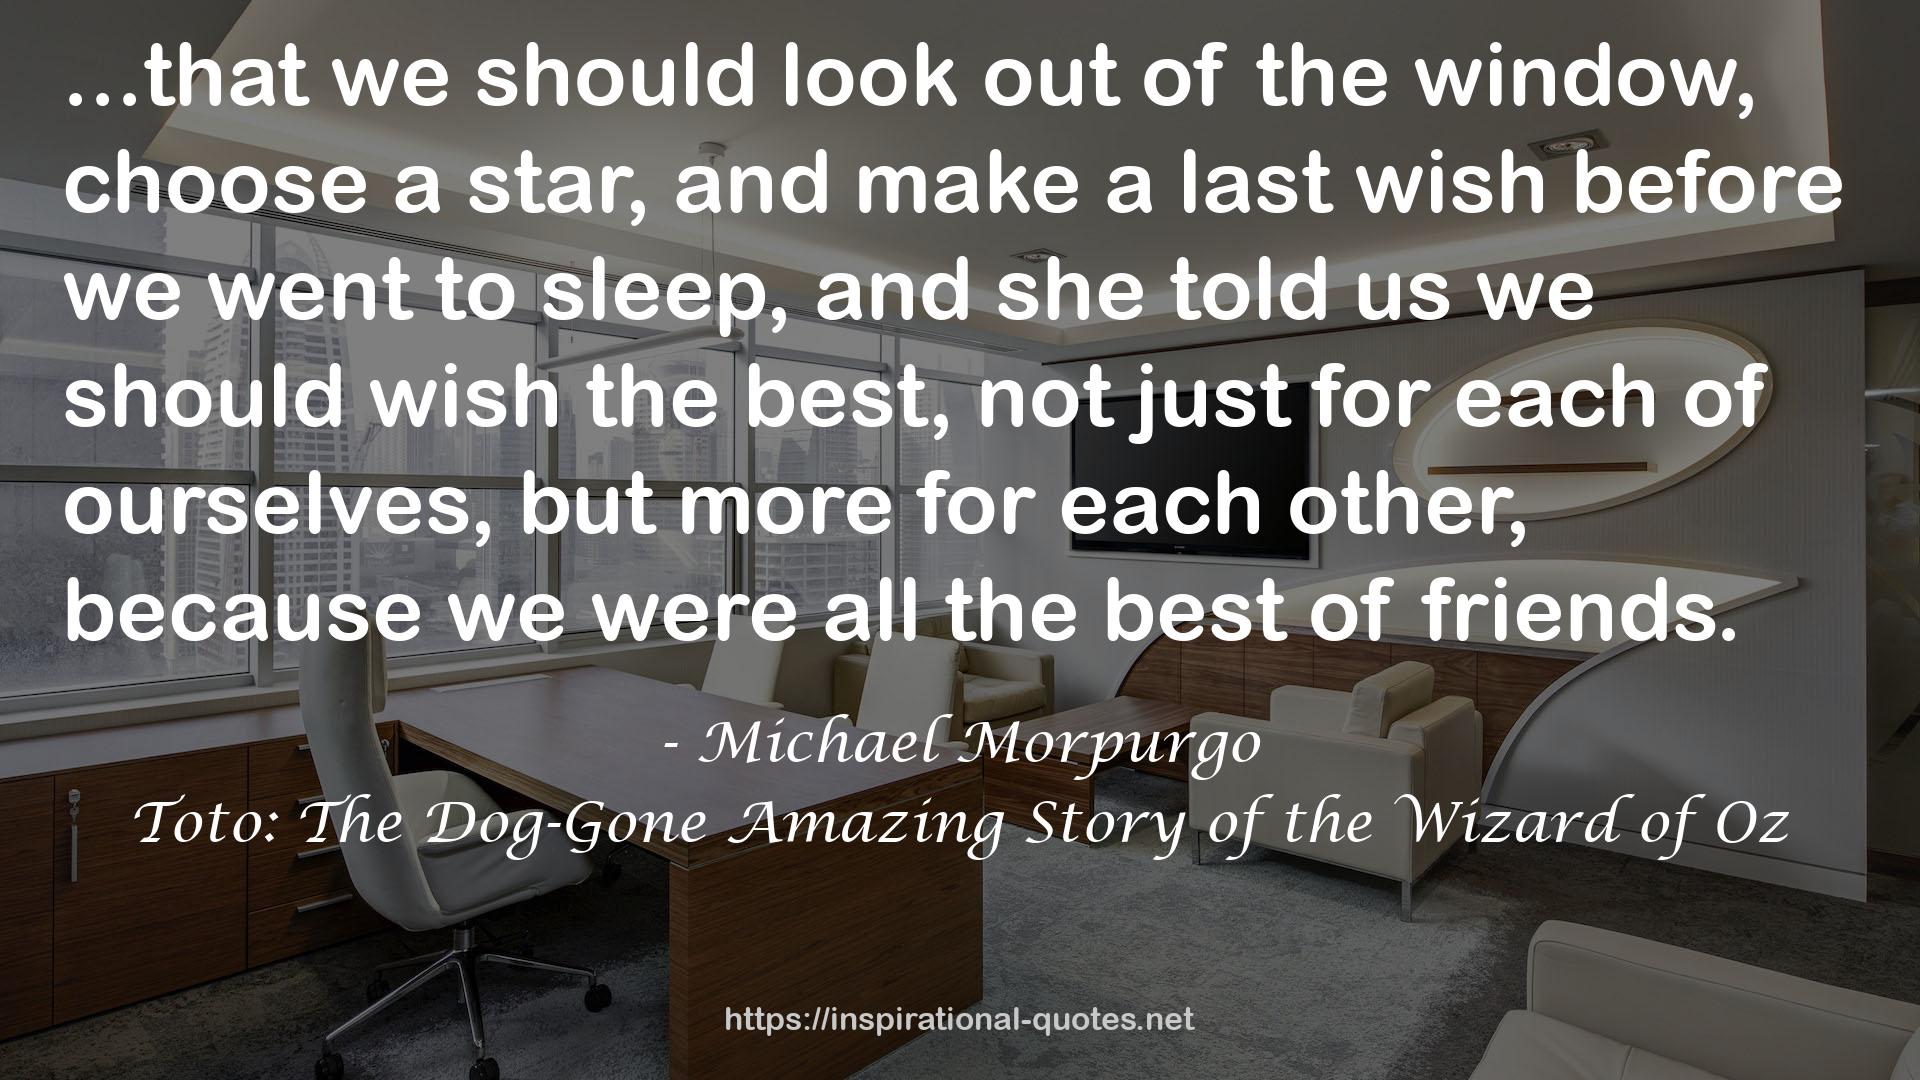 Toto: The Dog-Gone Amazing Story of the Wizard of Oz QUOTES